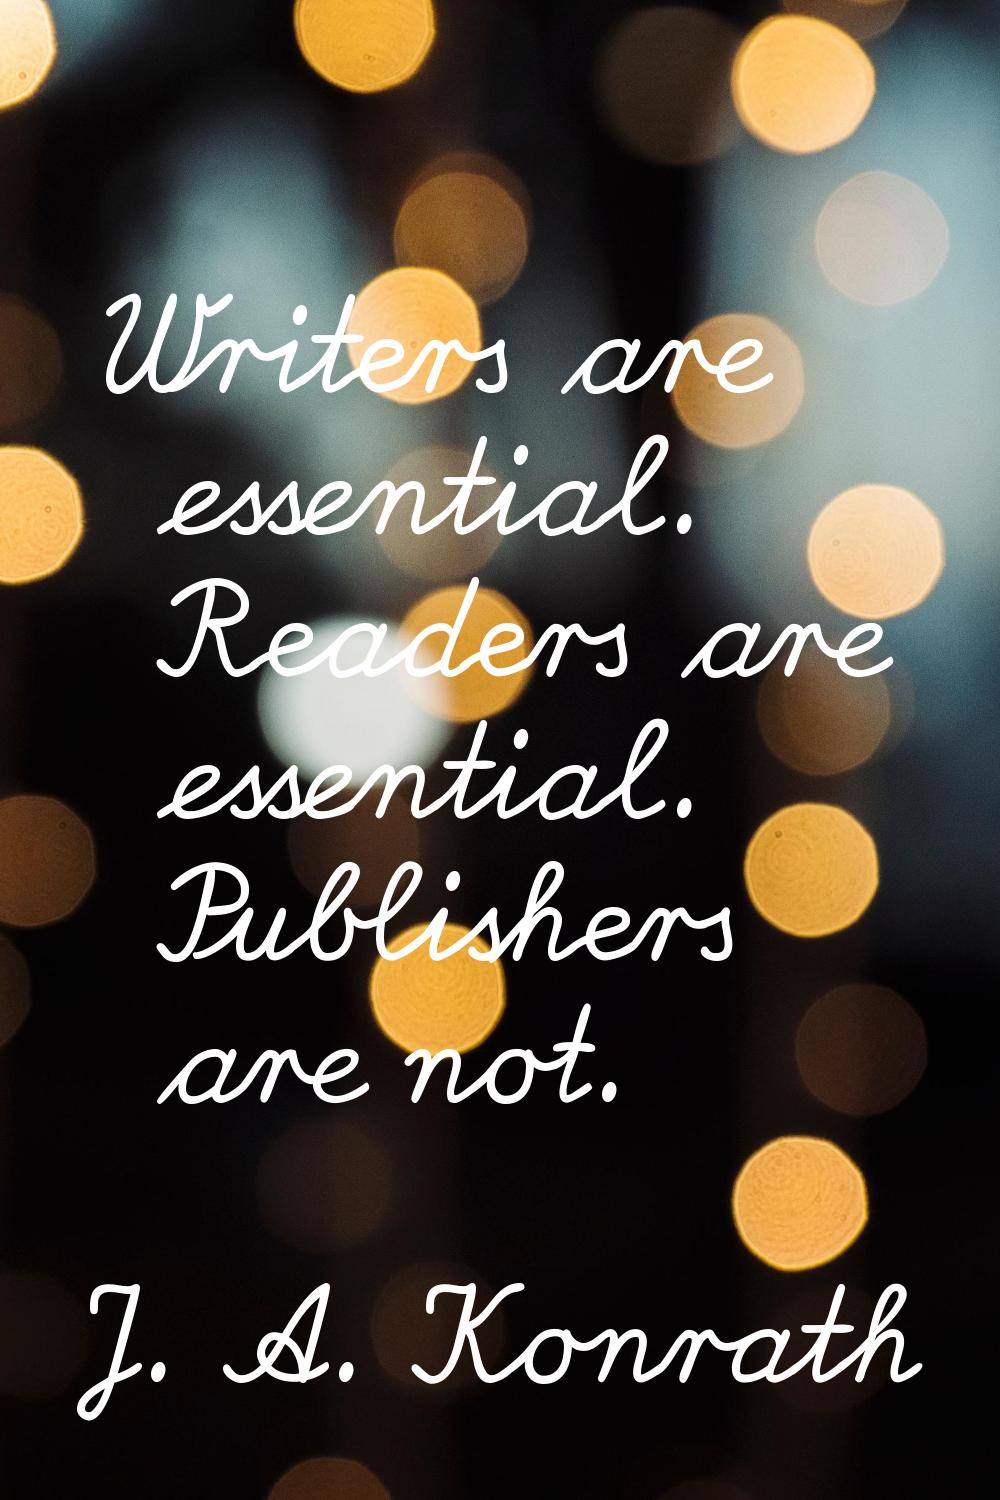 Writers are essential. Readers are essential. Publishers are not.